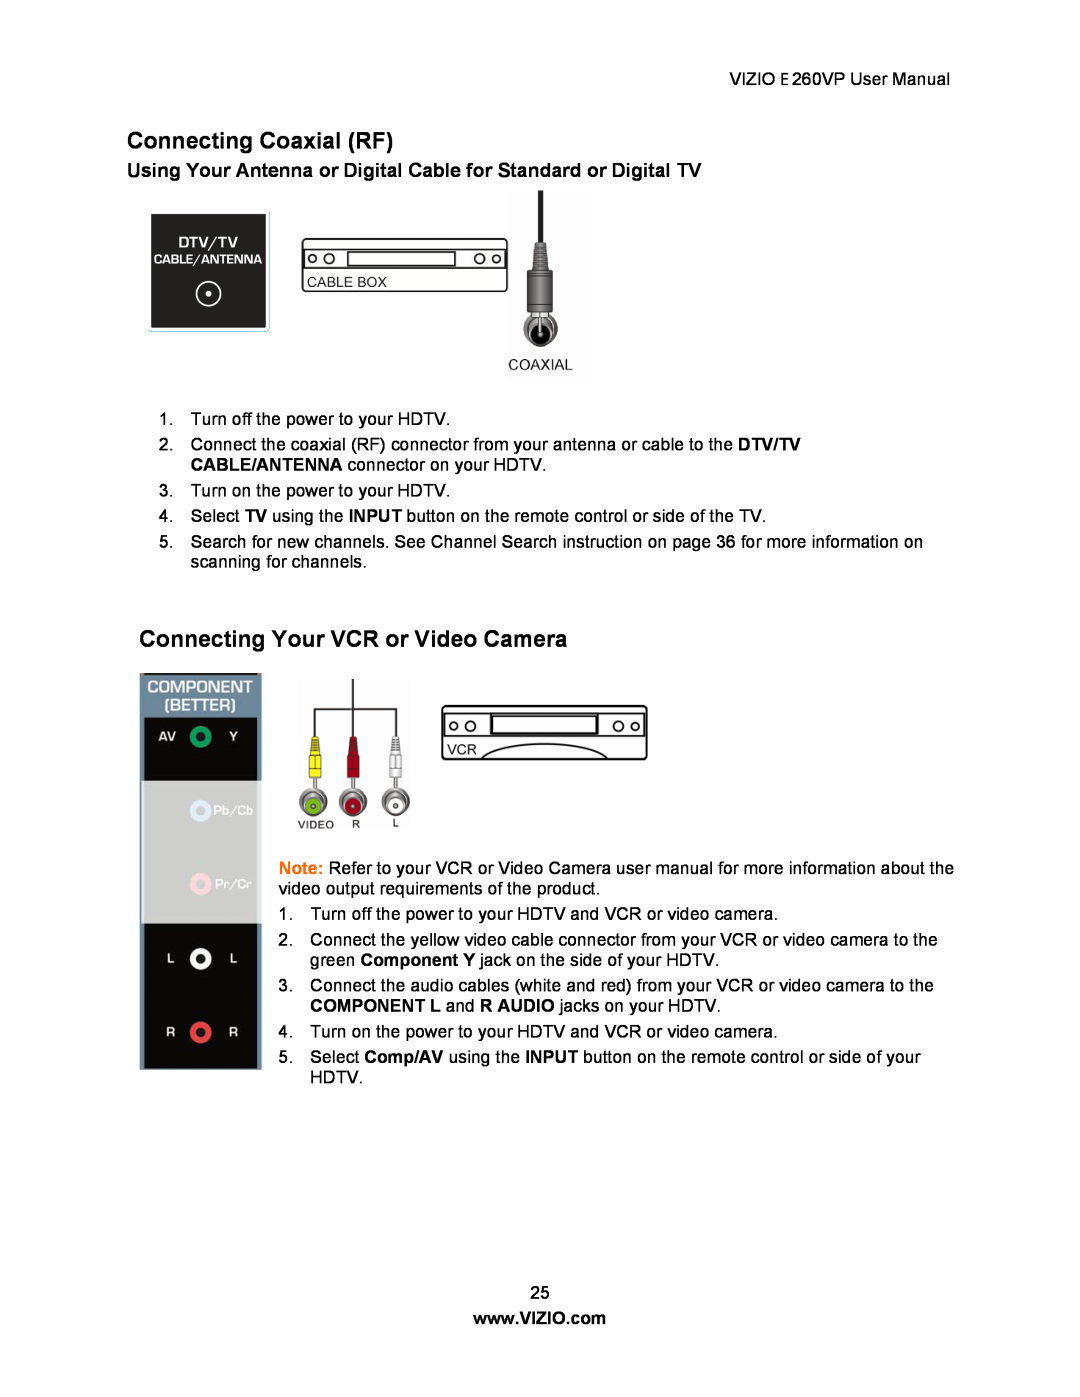 Vizio E260VP user manual Connecting Coaxial RF, Connecting Your VCR or Video Camera 